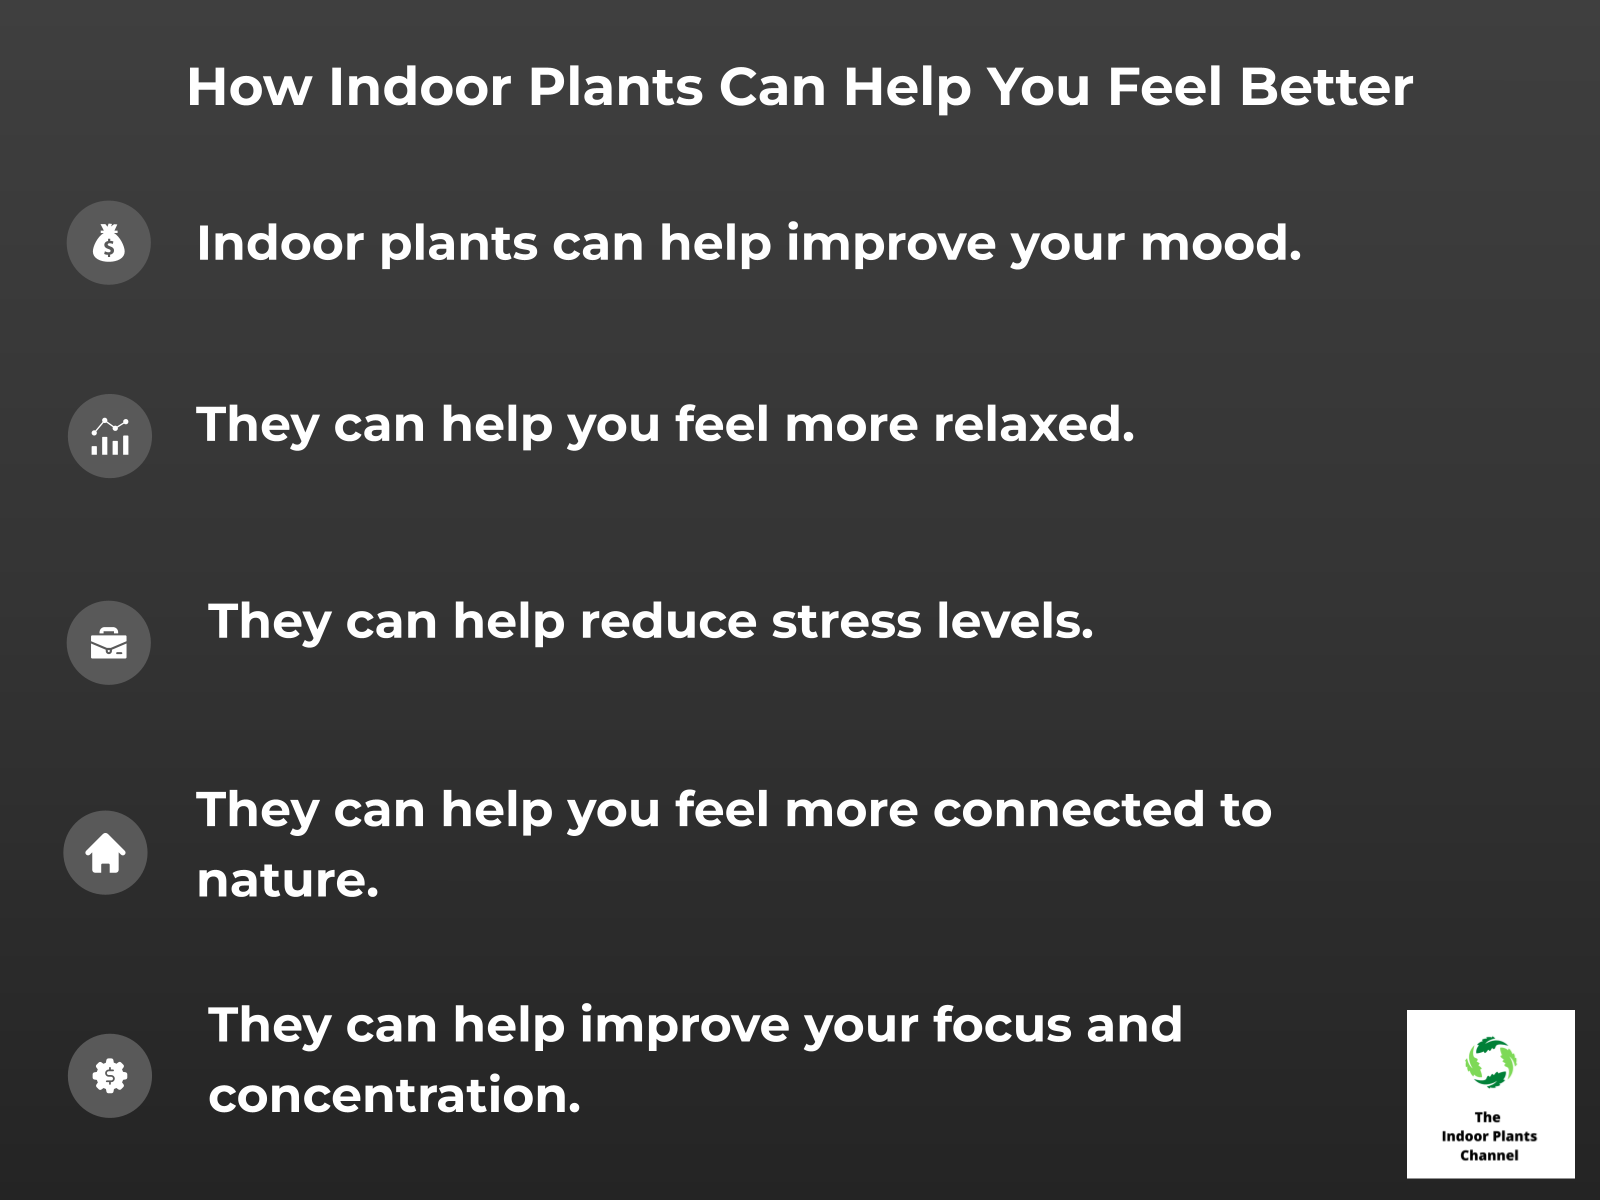 INFOGRAPHIC: How indoor plants can help you feel better